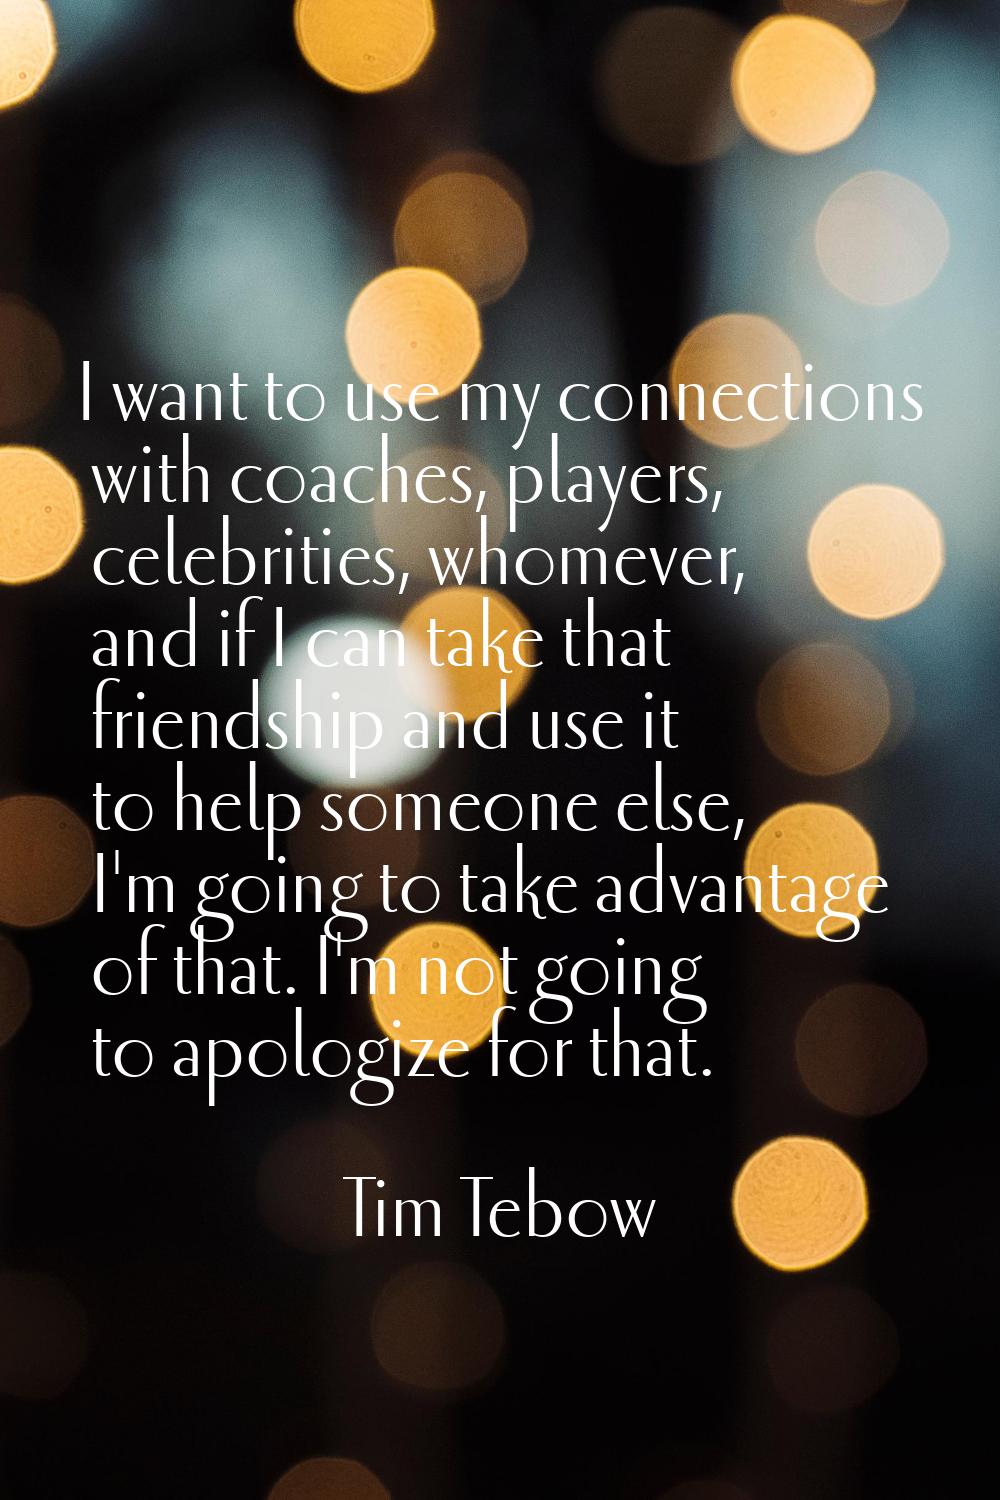 I want to use my connections with coaches, players, celebrities, whomever, and if I can take that f